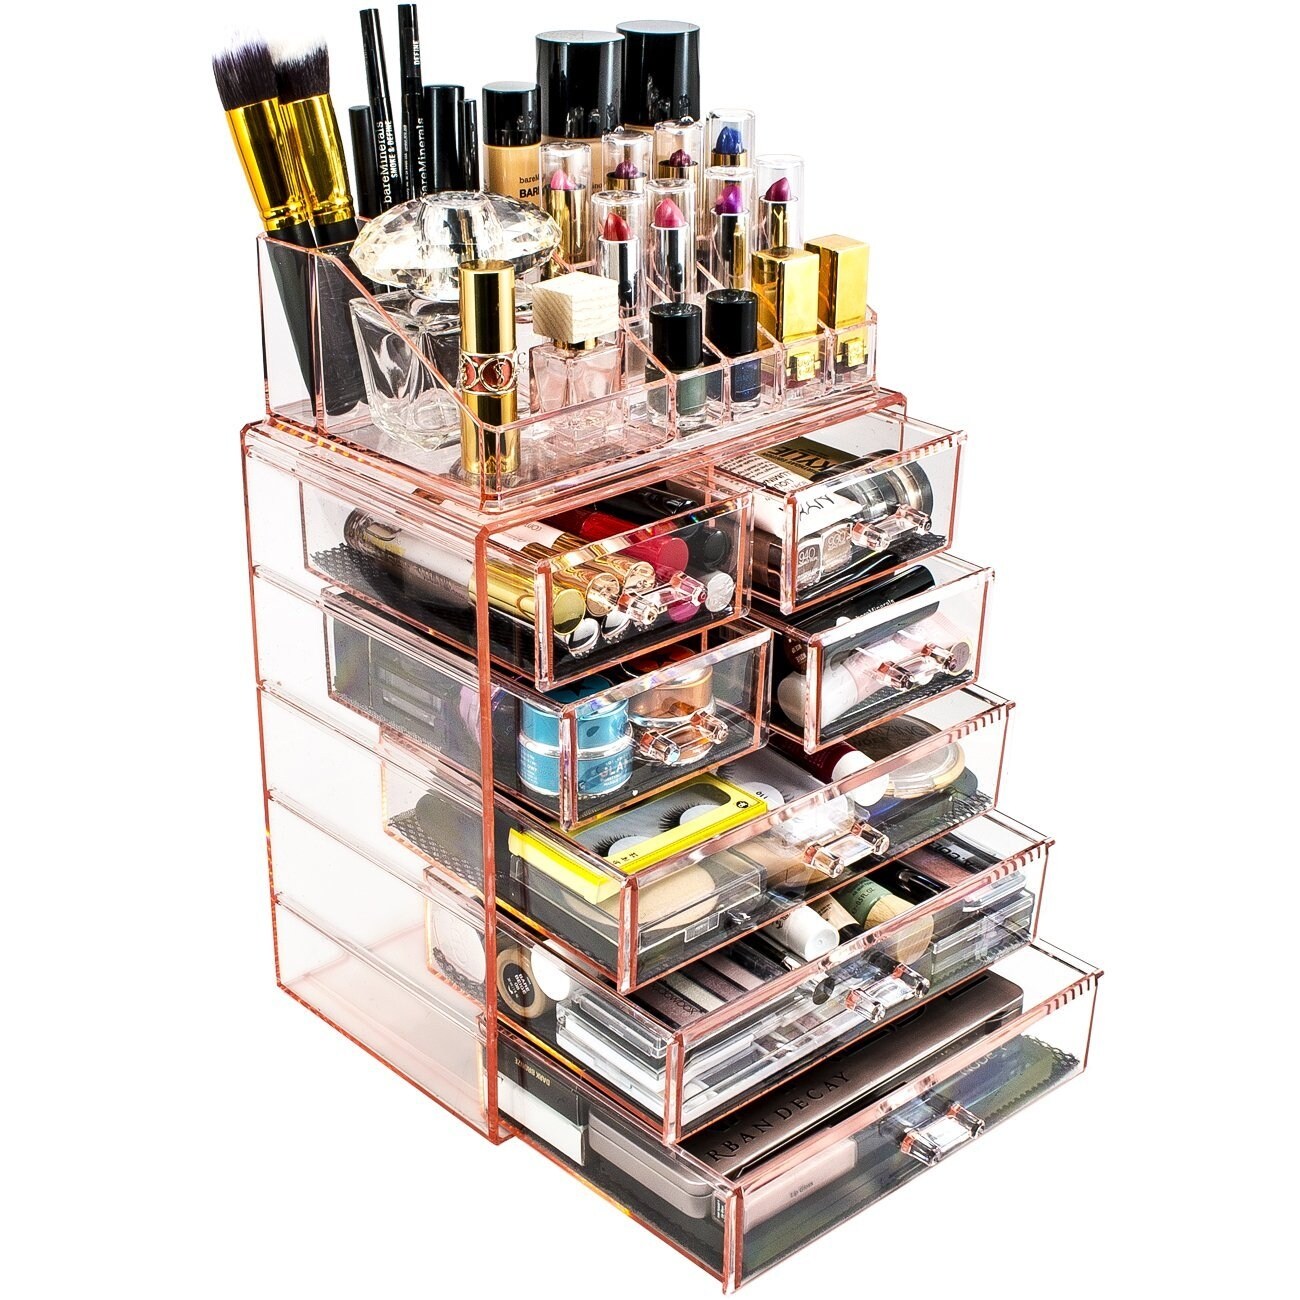 https://ak1.ostkcdn.com/images/products/is/images/direct/1cbd4c57410e153f27b1c29e297b7be01088ce83/Sorbus-Acrylic-Cosmetic-Makeup-and-Jewelry-Storage-Case-Display.jpg